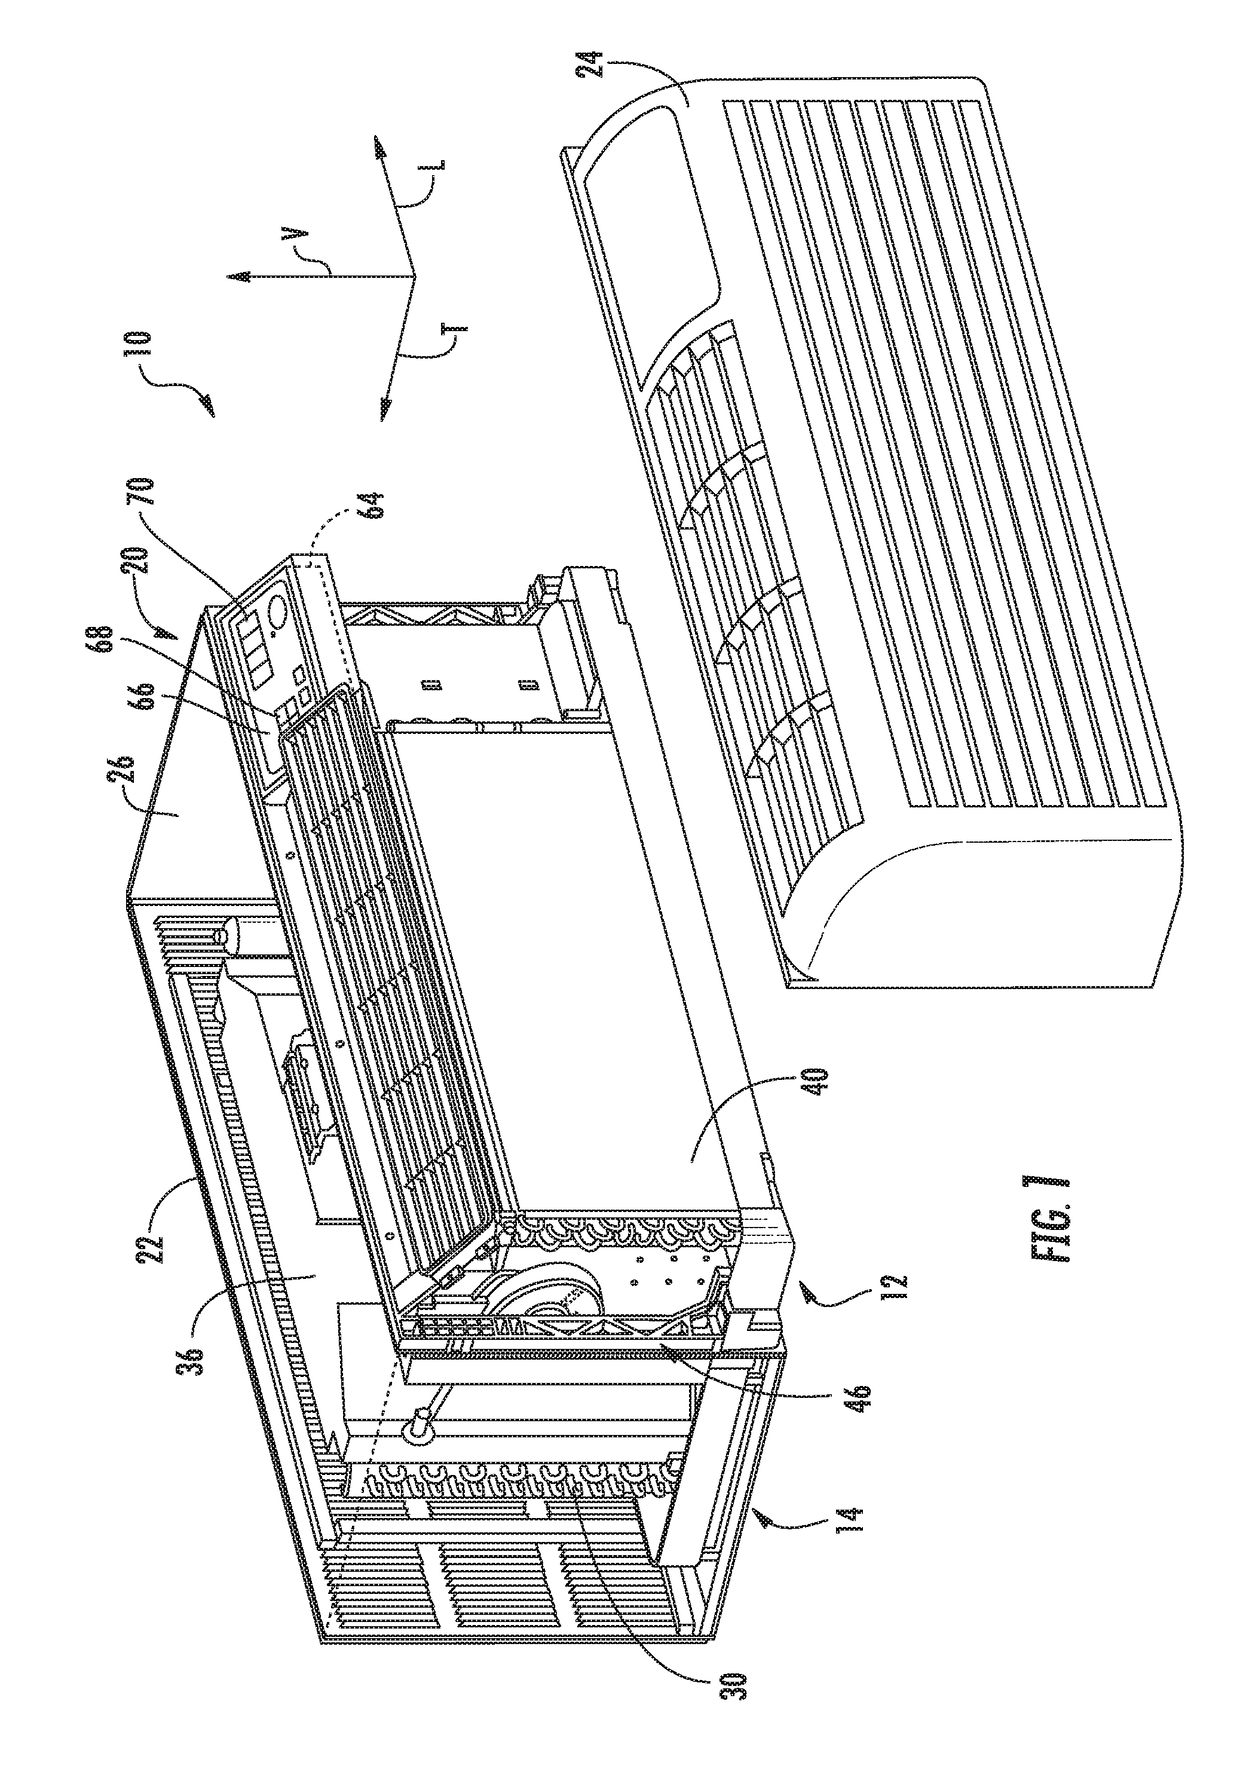 System and method for operating a packaged terminal air conditioner unit based on room occupancy